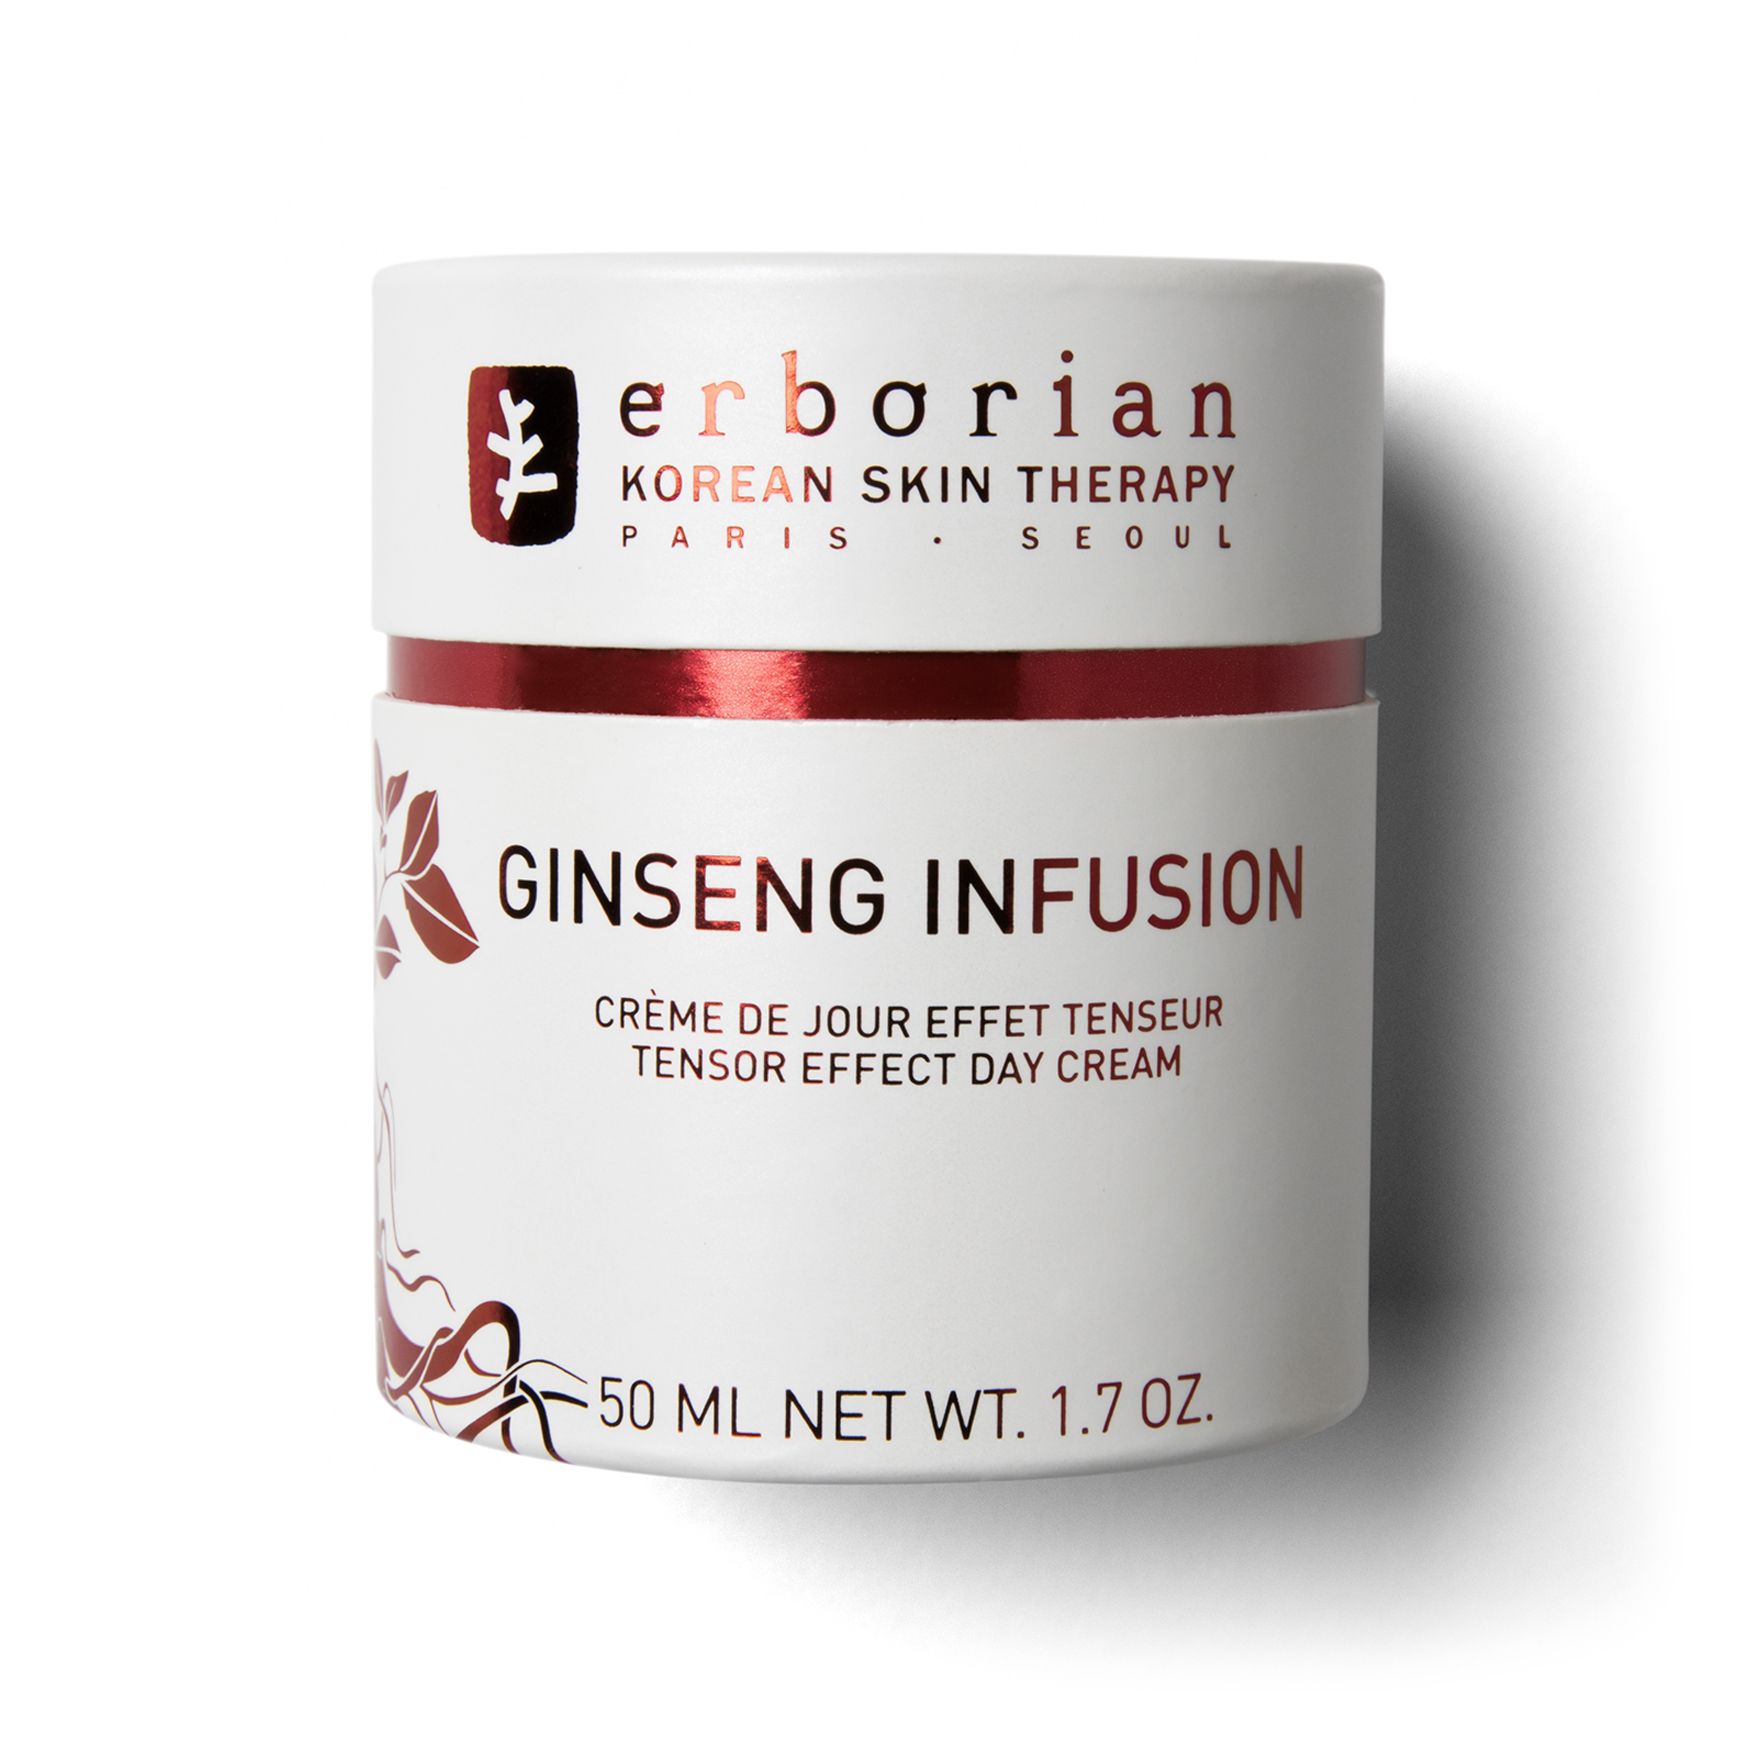 Erborian Ginseng Infusion | Space NK